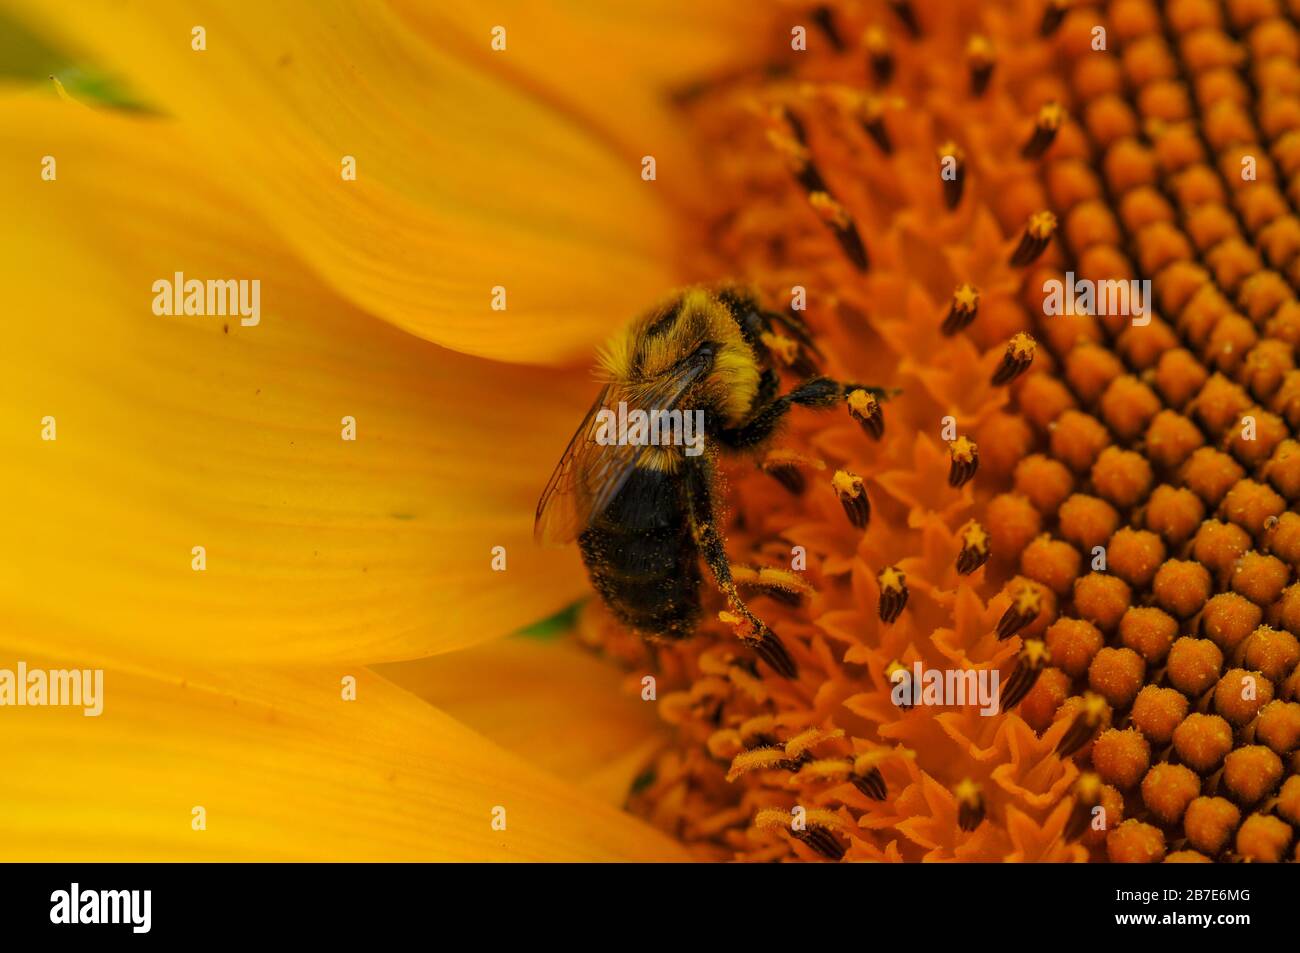 Sunflower in bloom with a pollen covered bee. Stock Photo